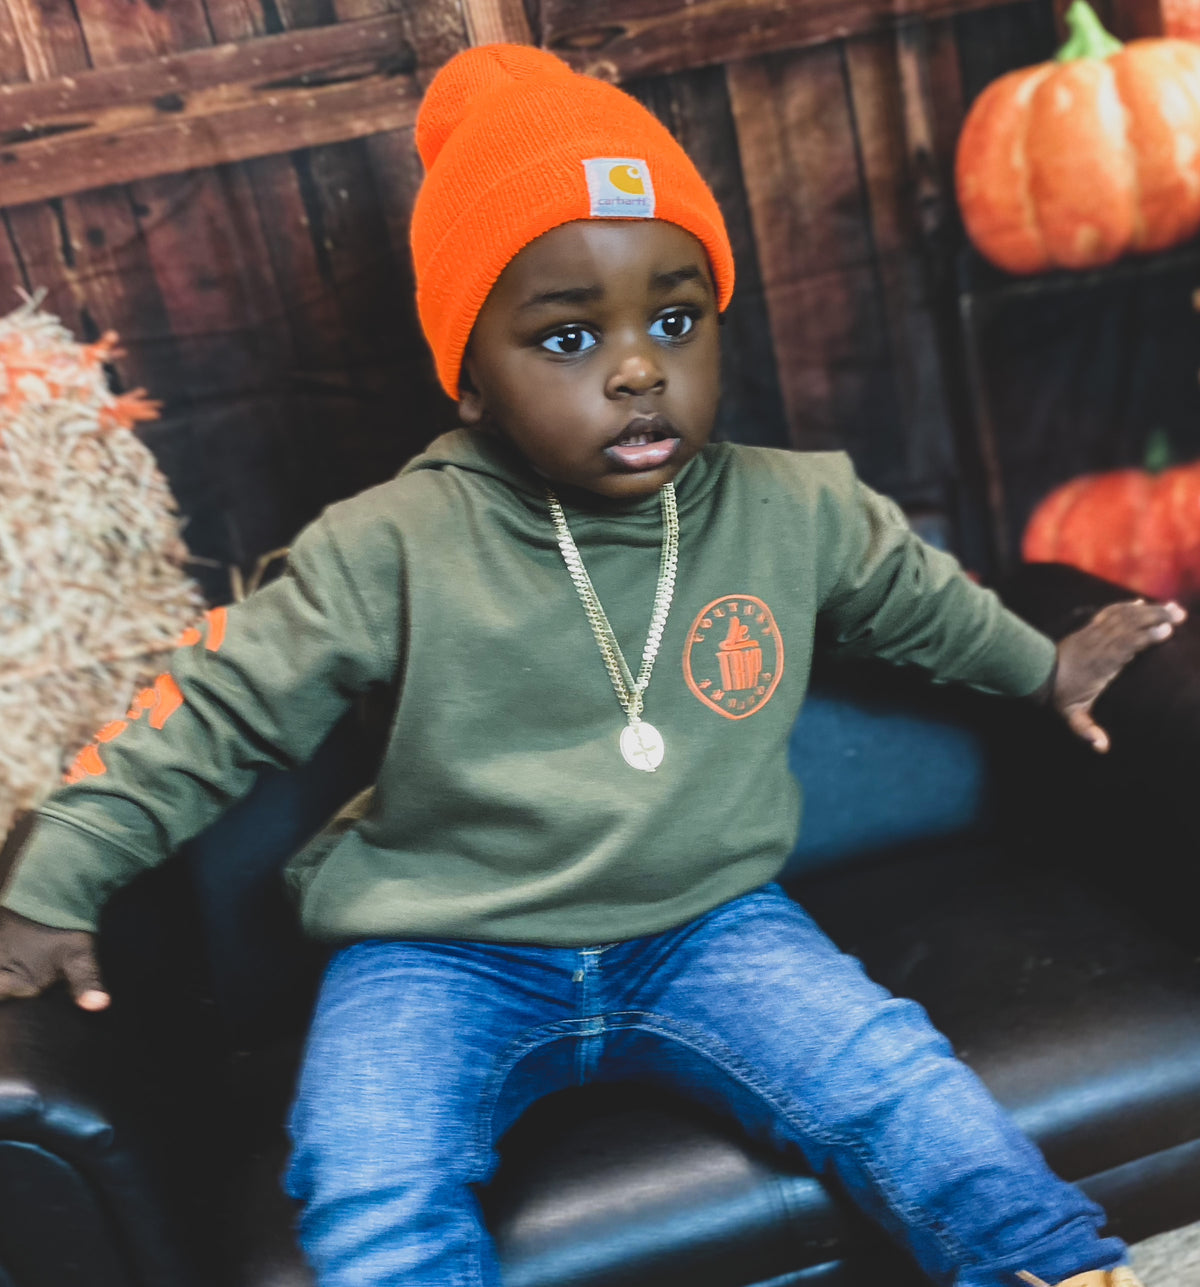 Le Trap Couture “Free Play” Toddler Hoodie